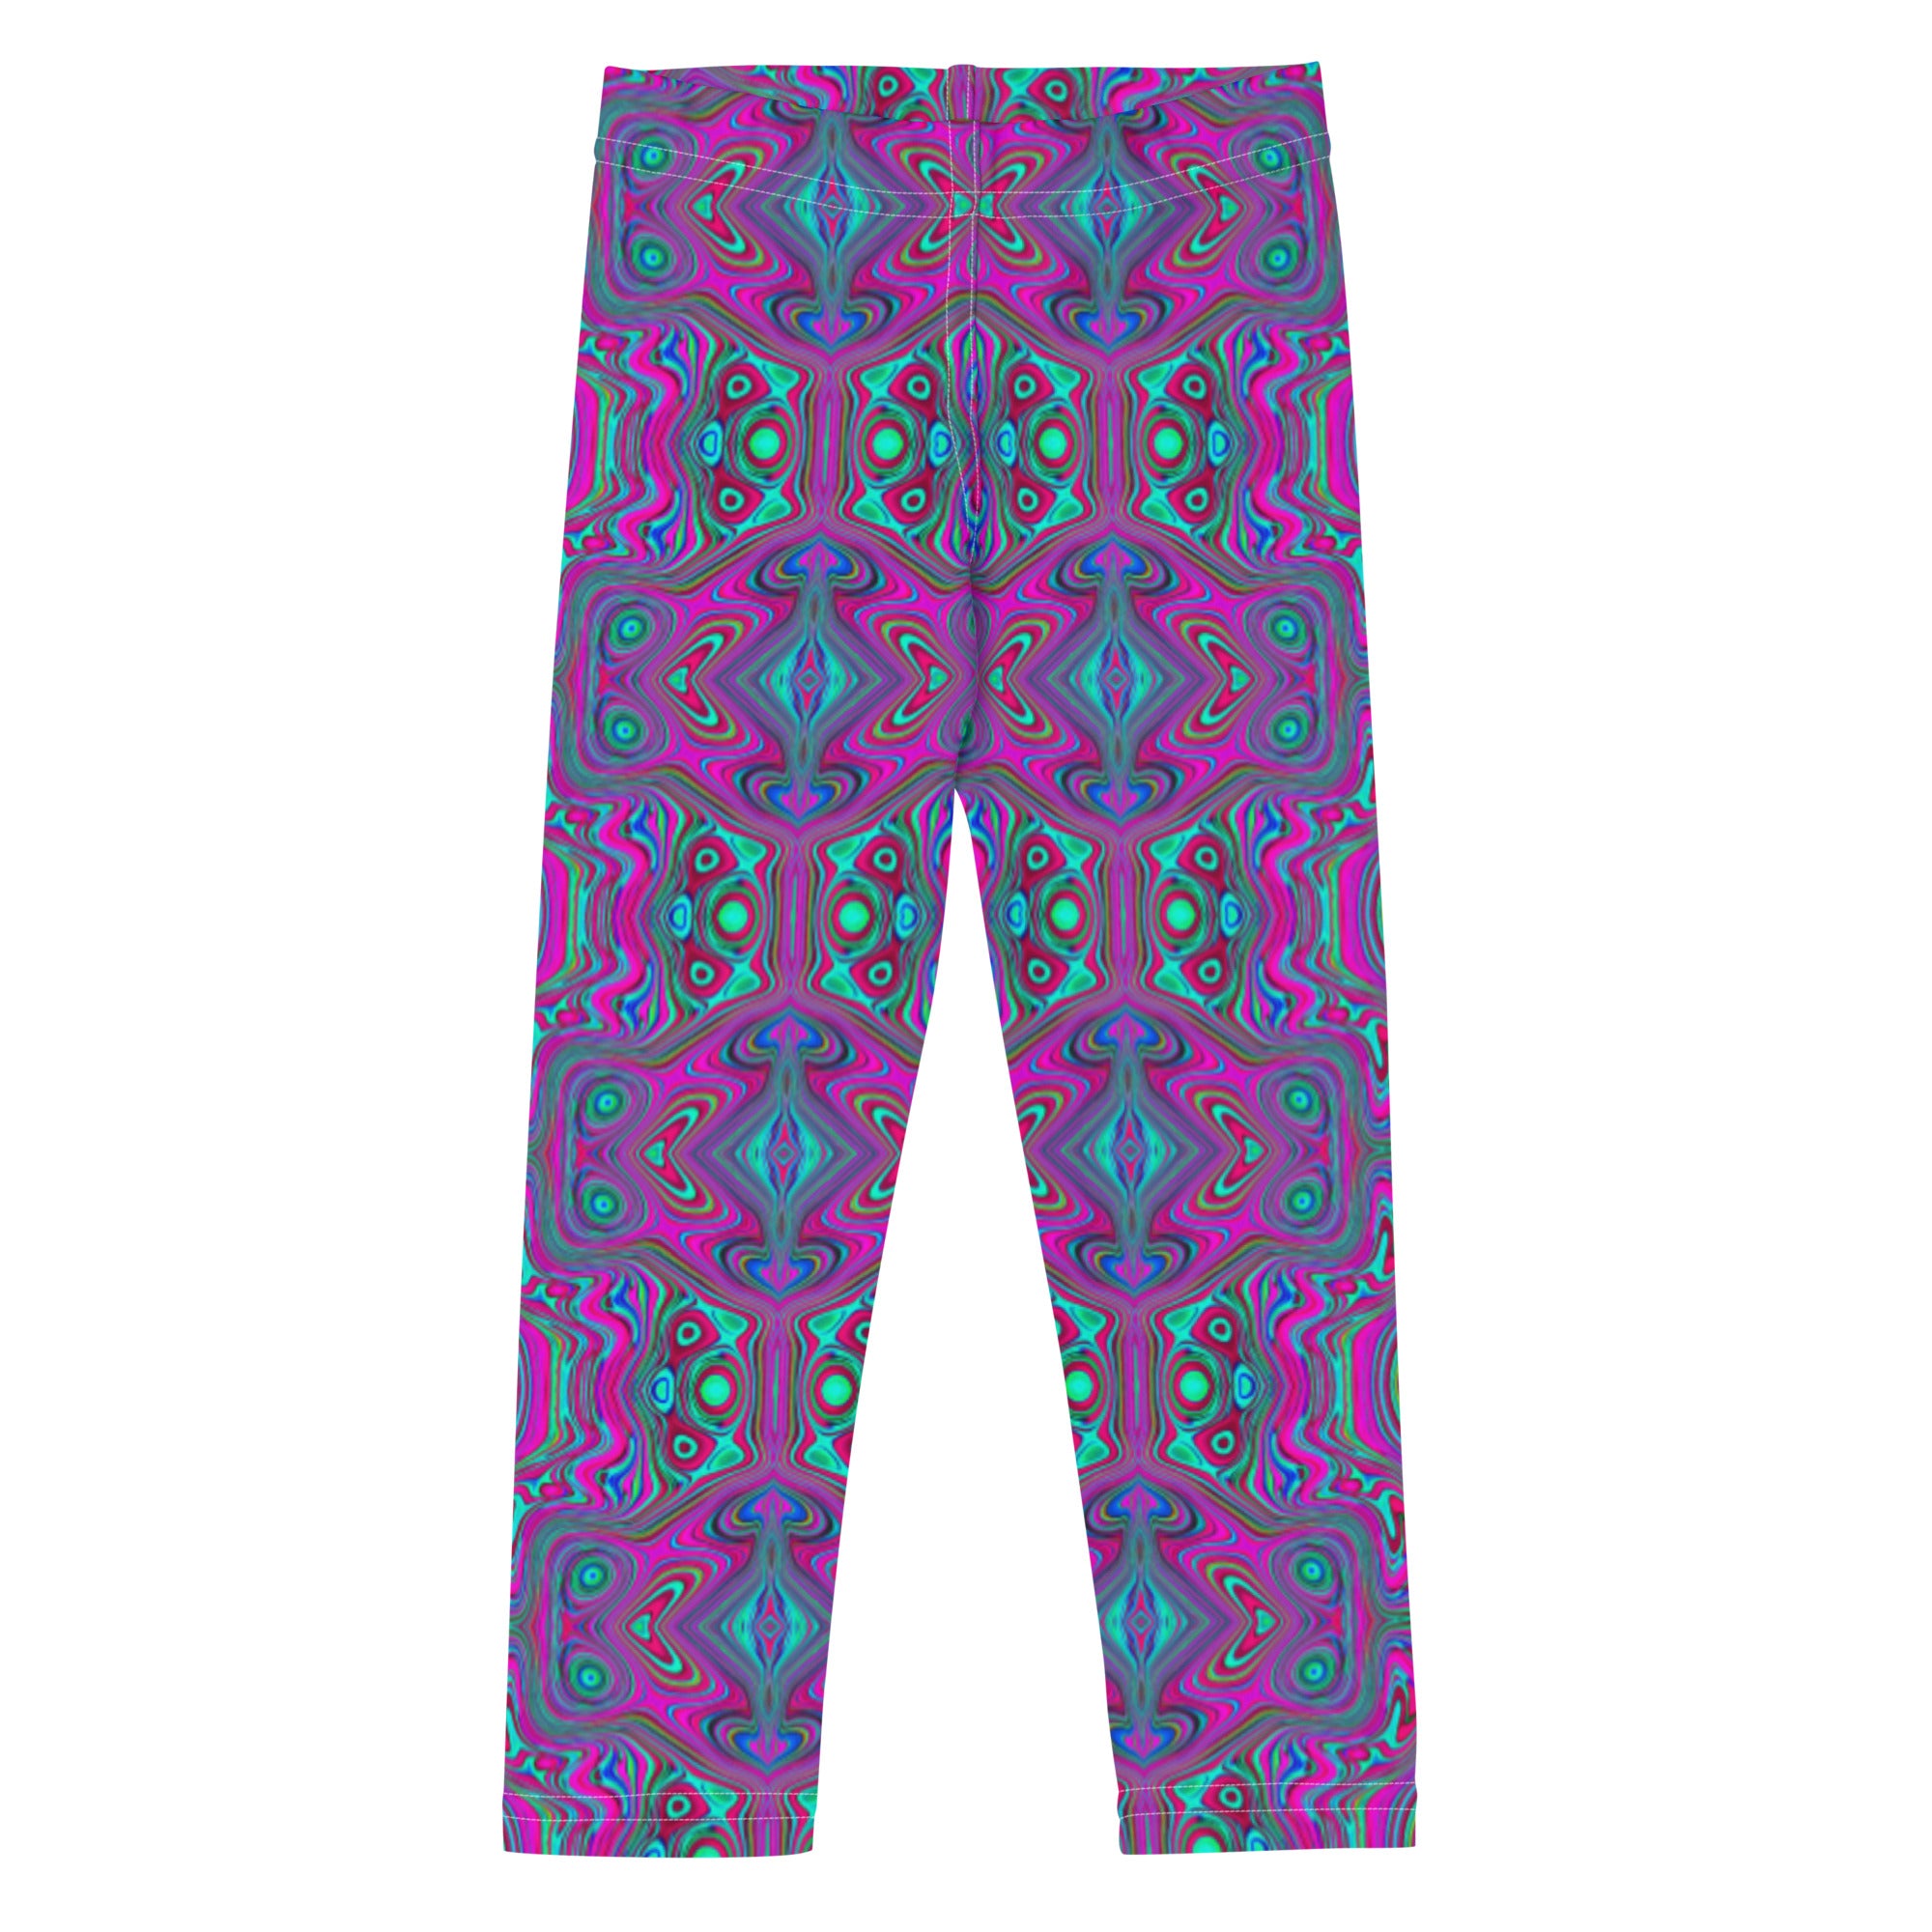 Kid's Leggings, Trippy Retro Magenta, Blue and Green Abstract